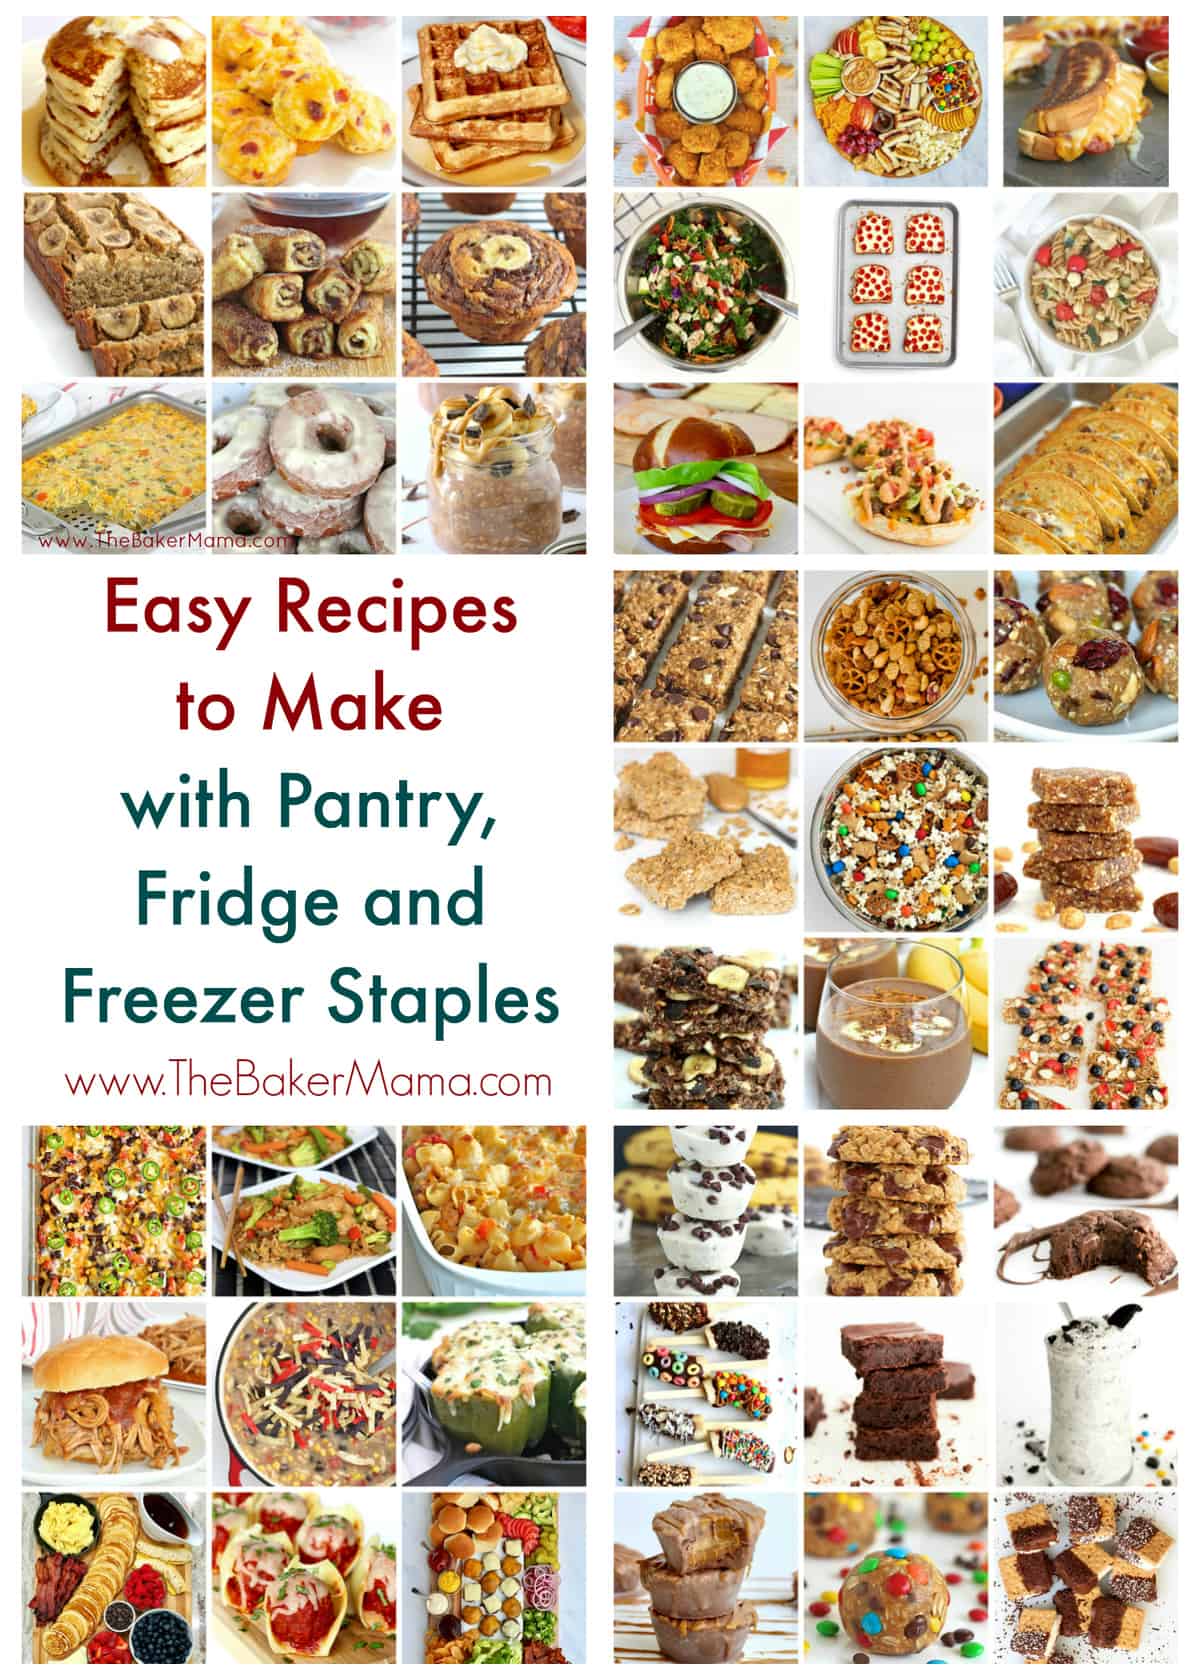 Easy Recipes to Make with Pantry, Refrigerator and Freezer Staples